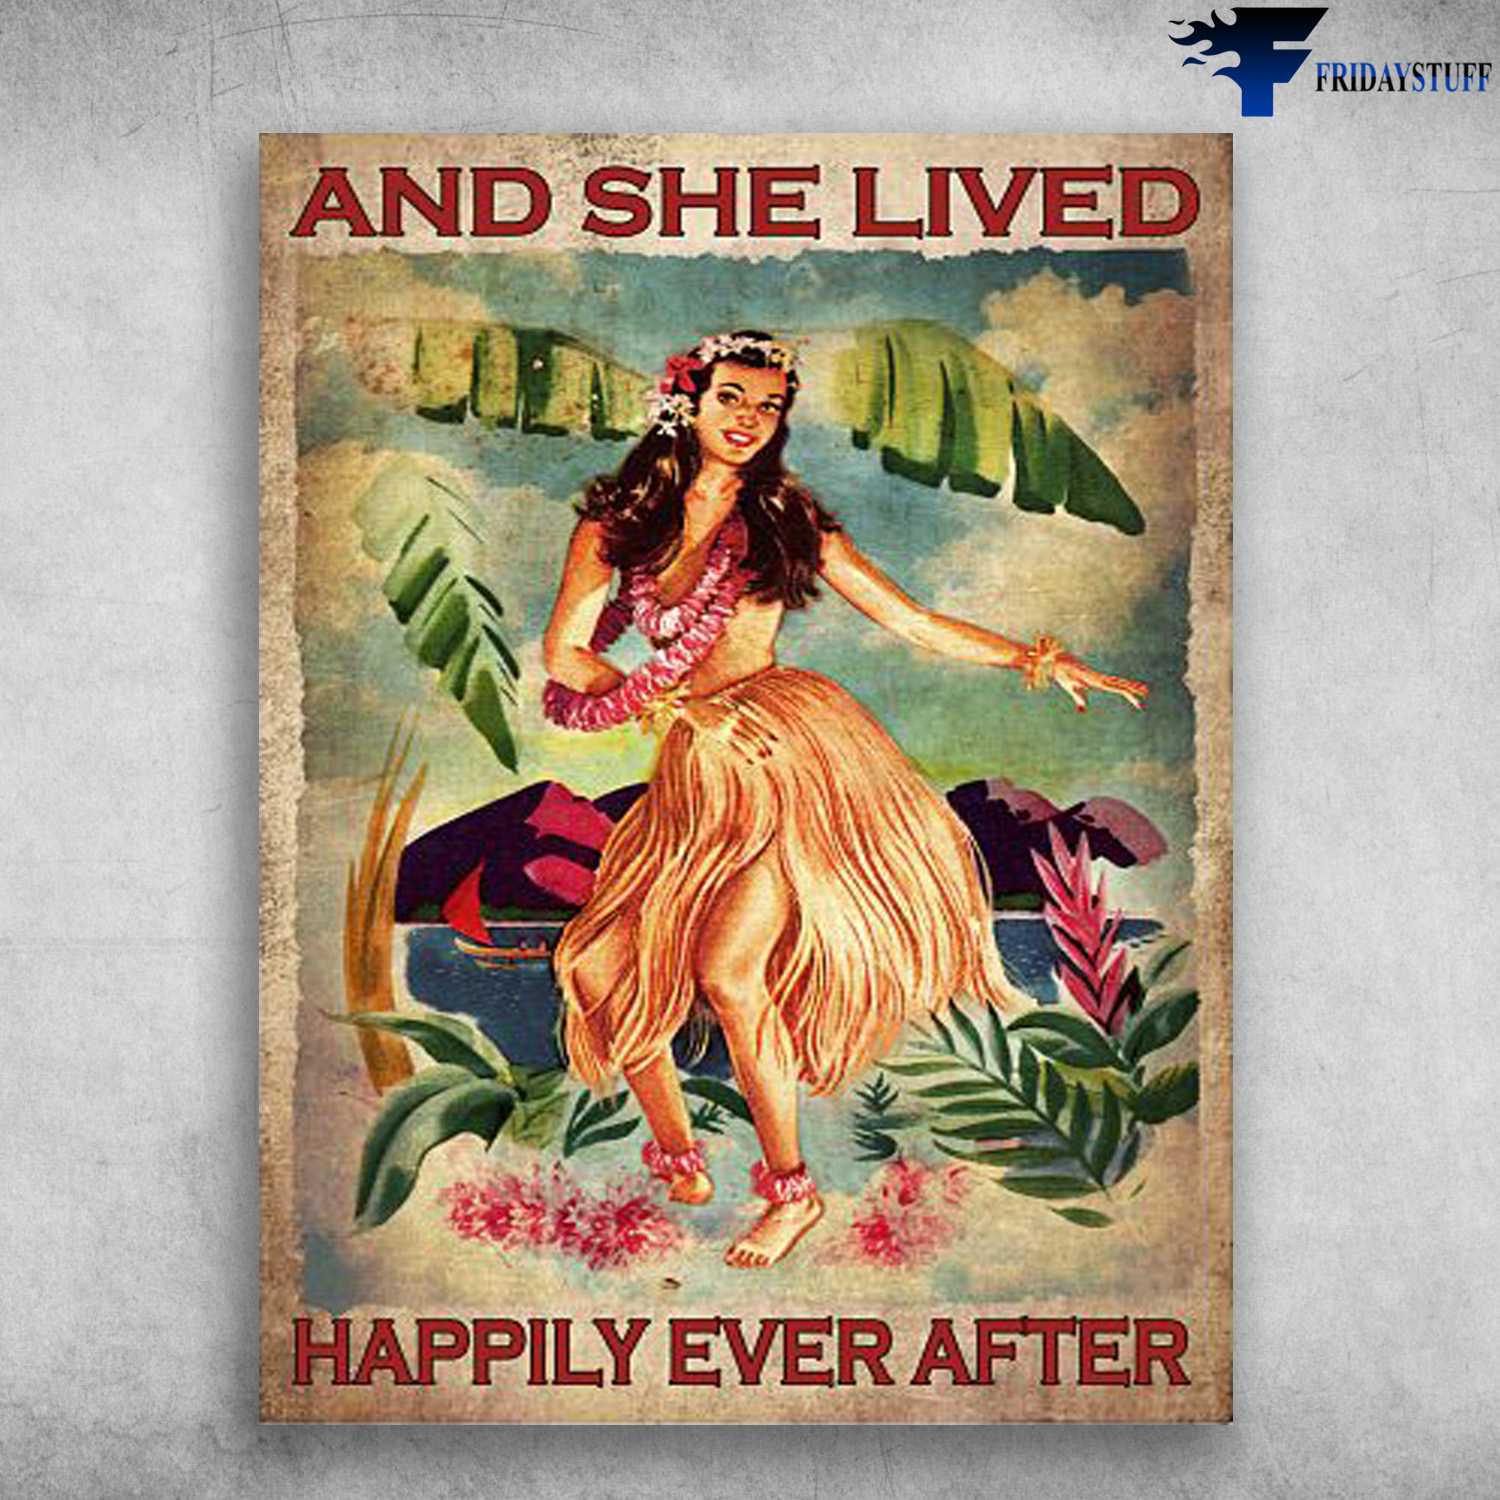 Hawaii Girl, Dancing Girl - And She Lived, Happily Ever After